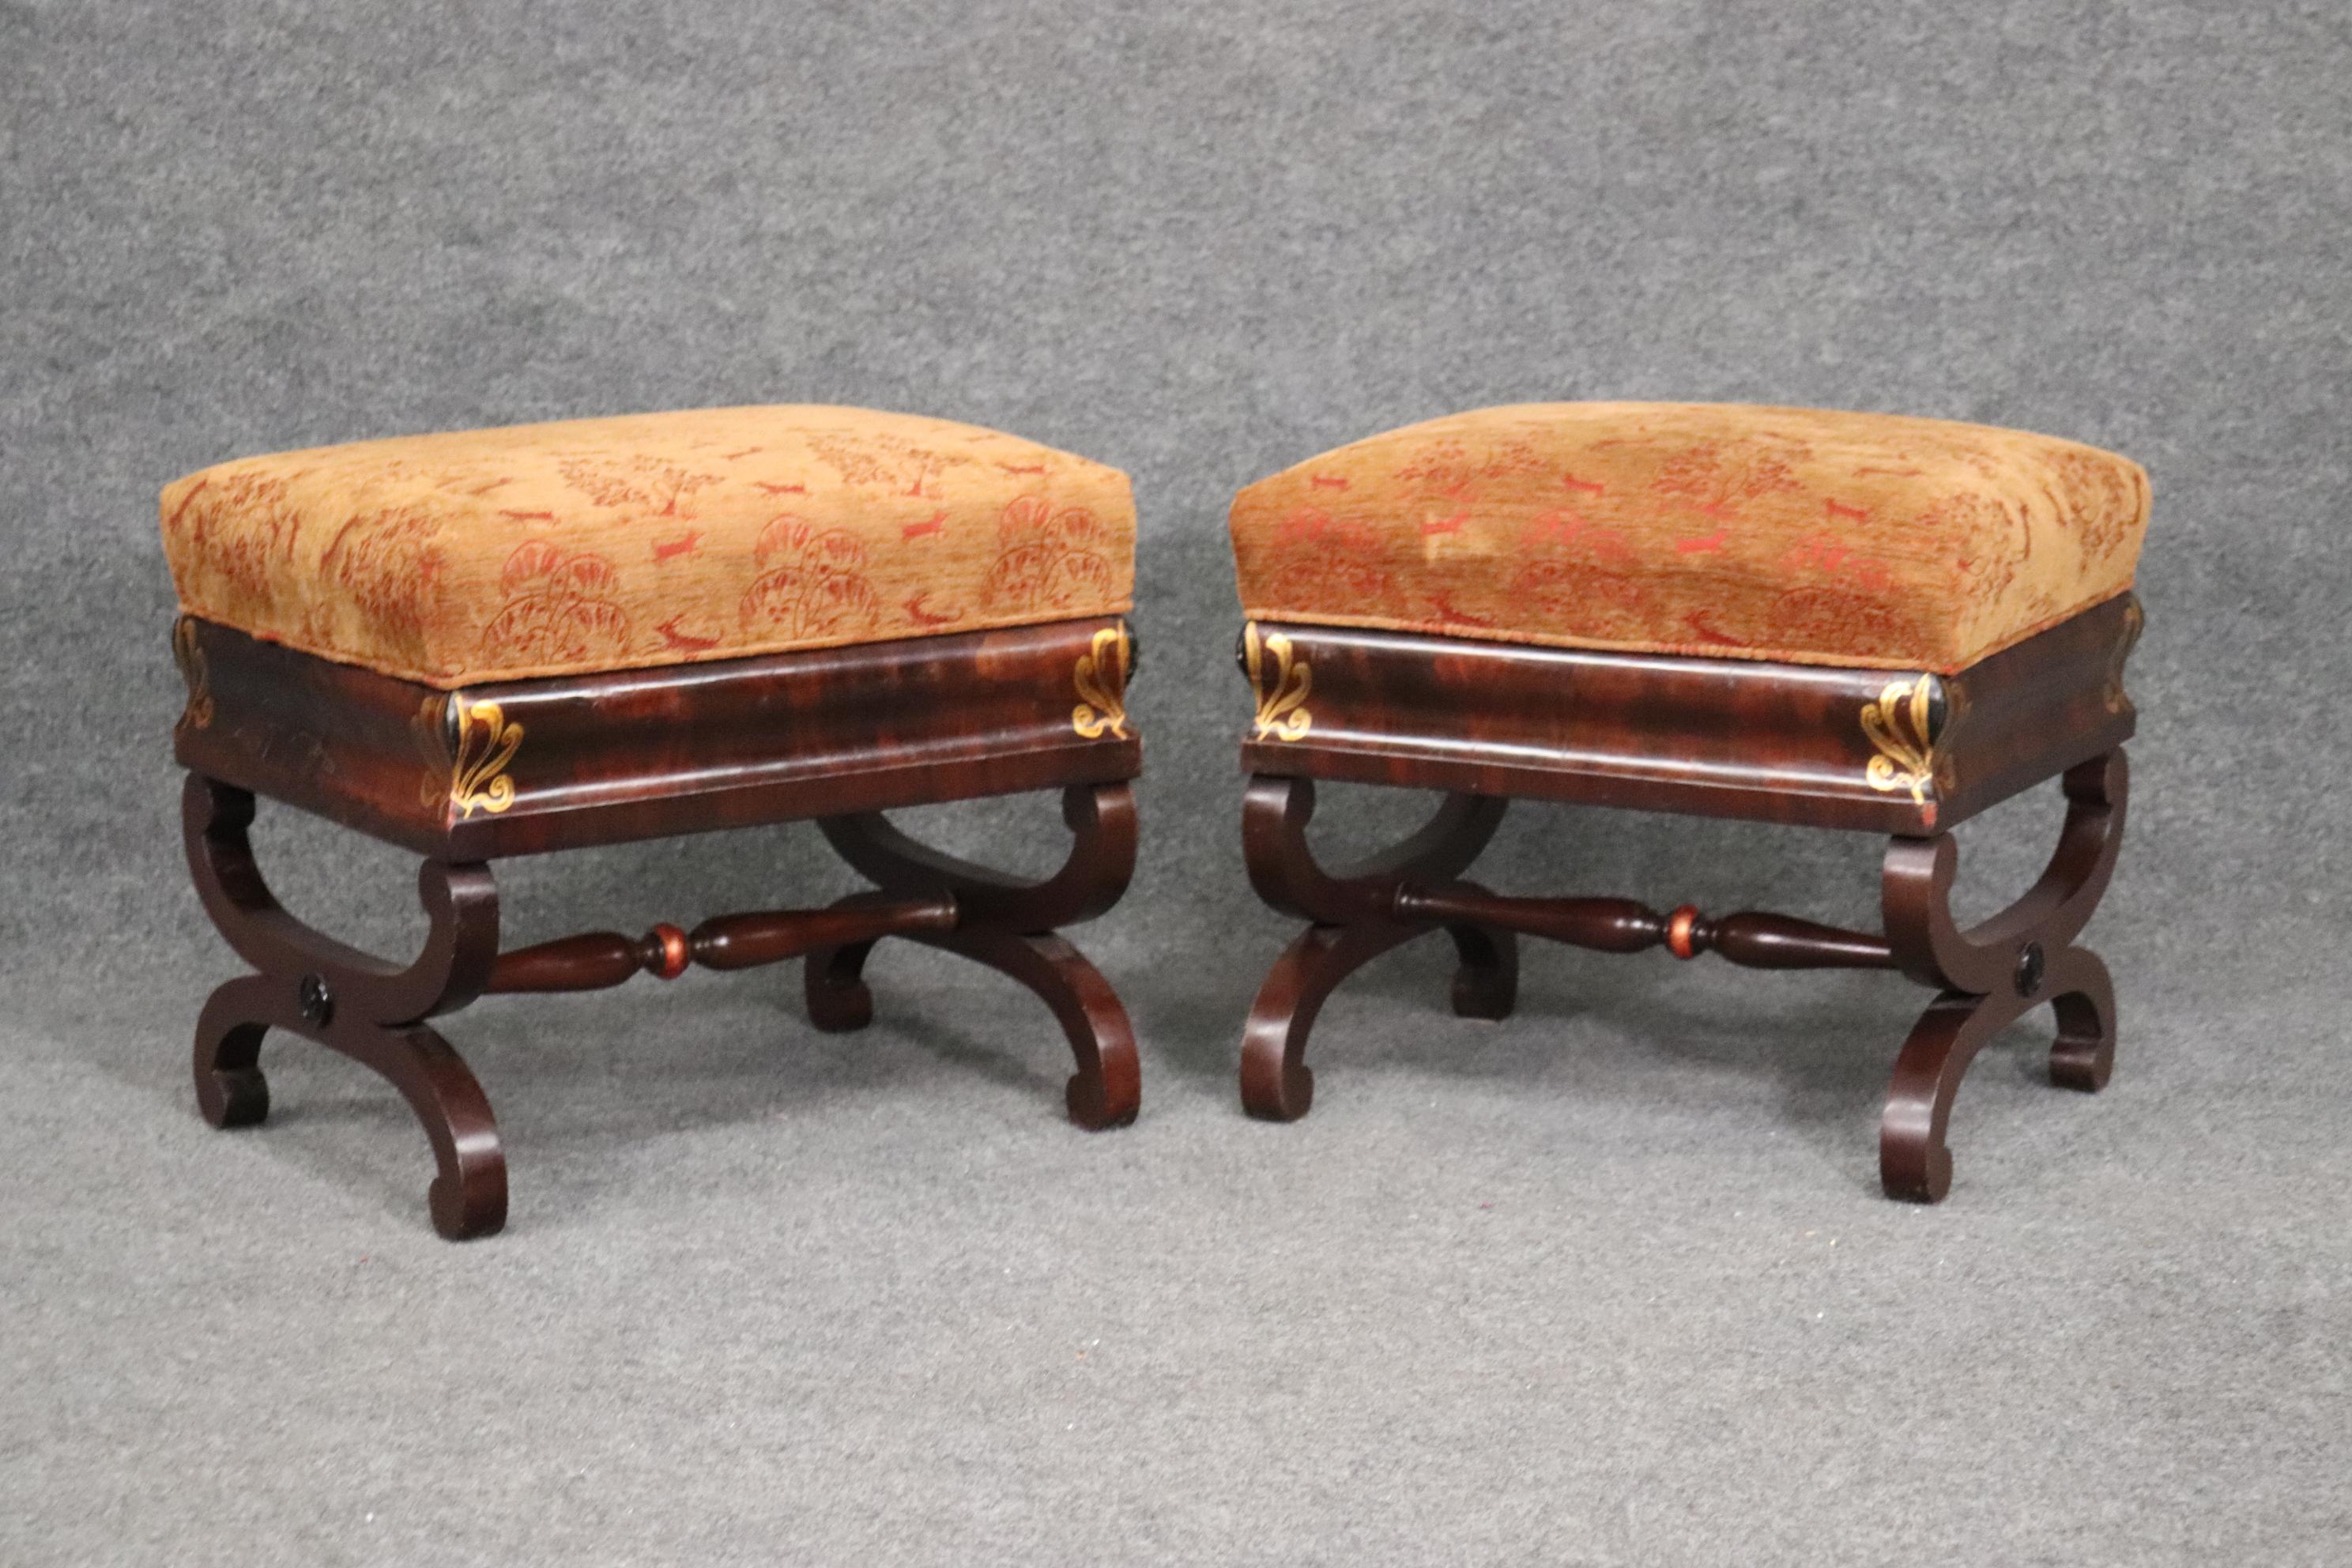 This is a beautiful pair of empire stools with gilded anthemia. They each are in good condition and measure 16 dep x 20 wide x 18 inches tall, They date to teh 1840s era.